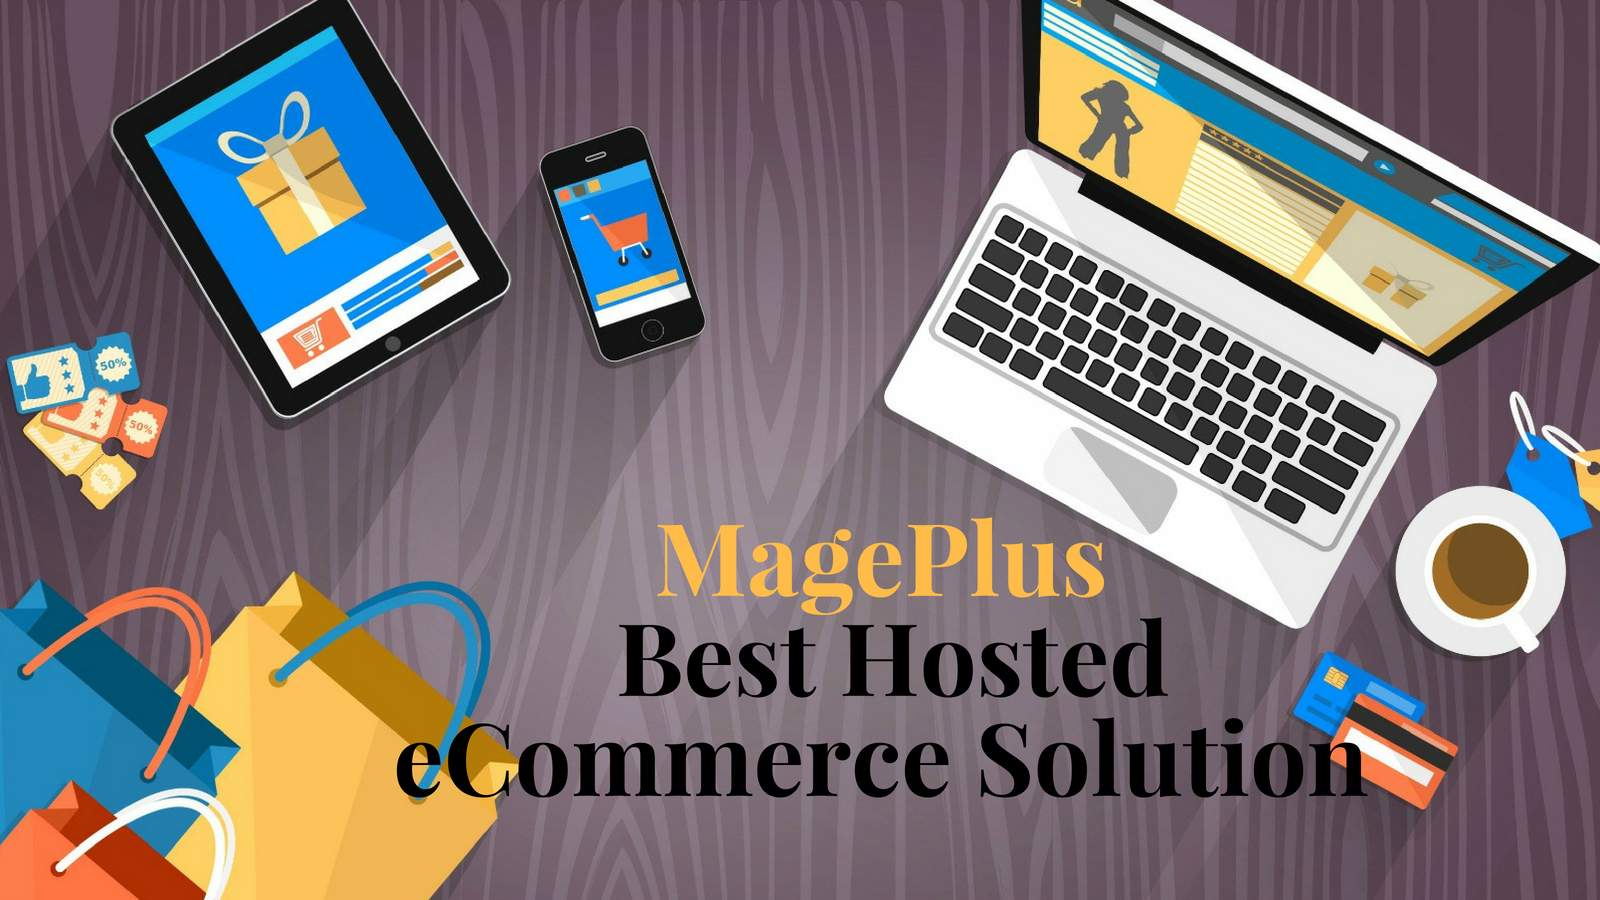 MagePlus - Best Hosted eCommerce Solution-min